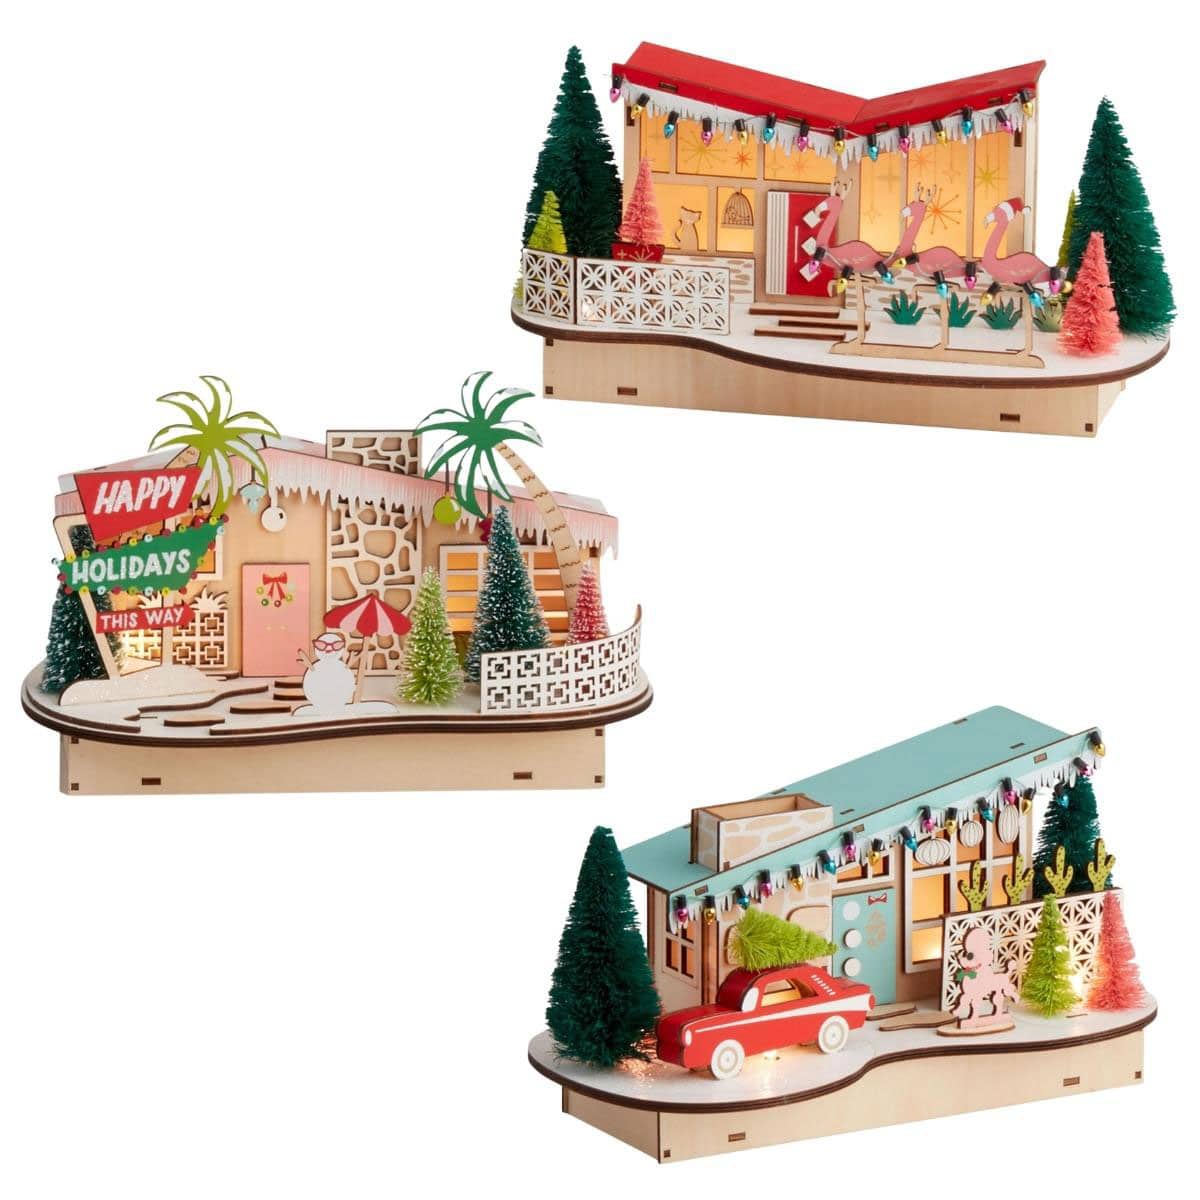 mid-century modern wooden houses for Christmas.